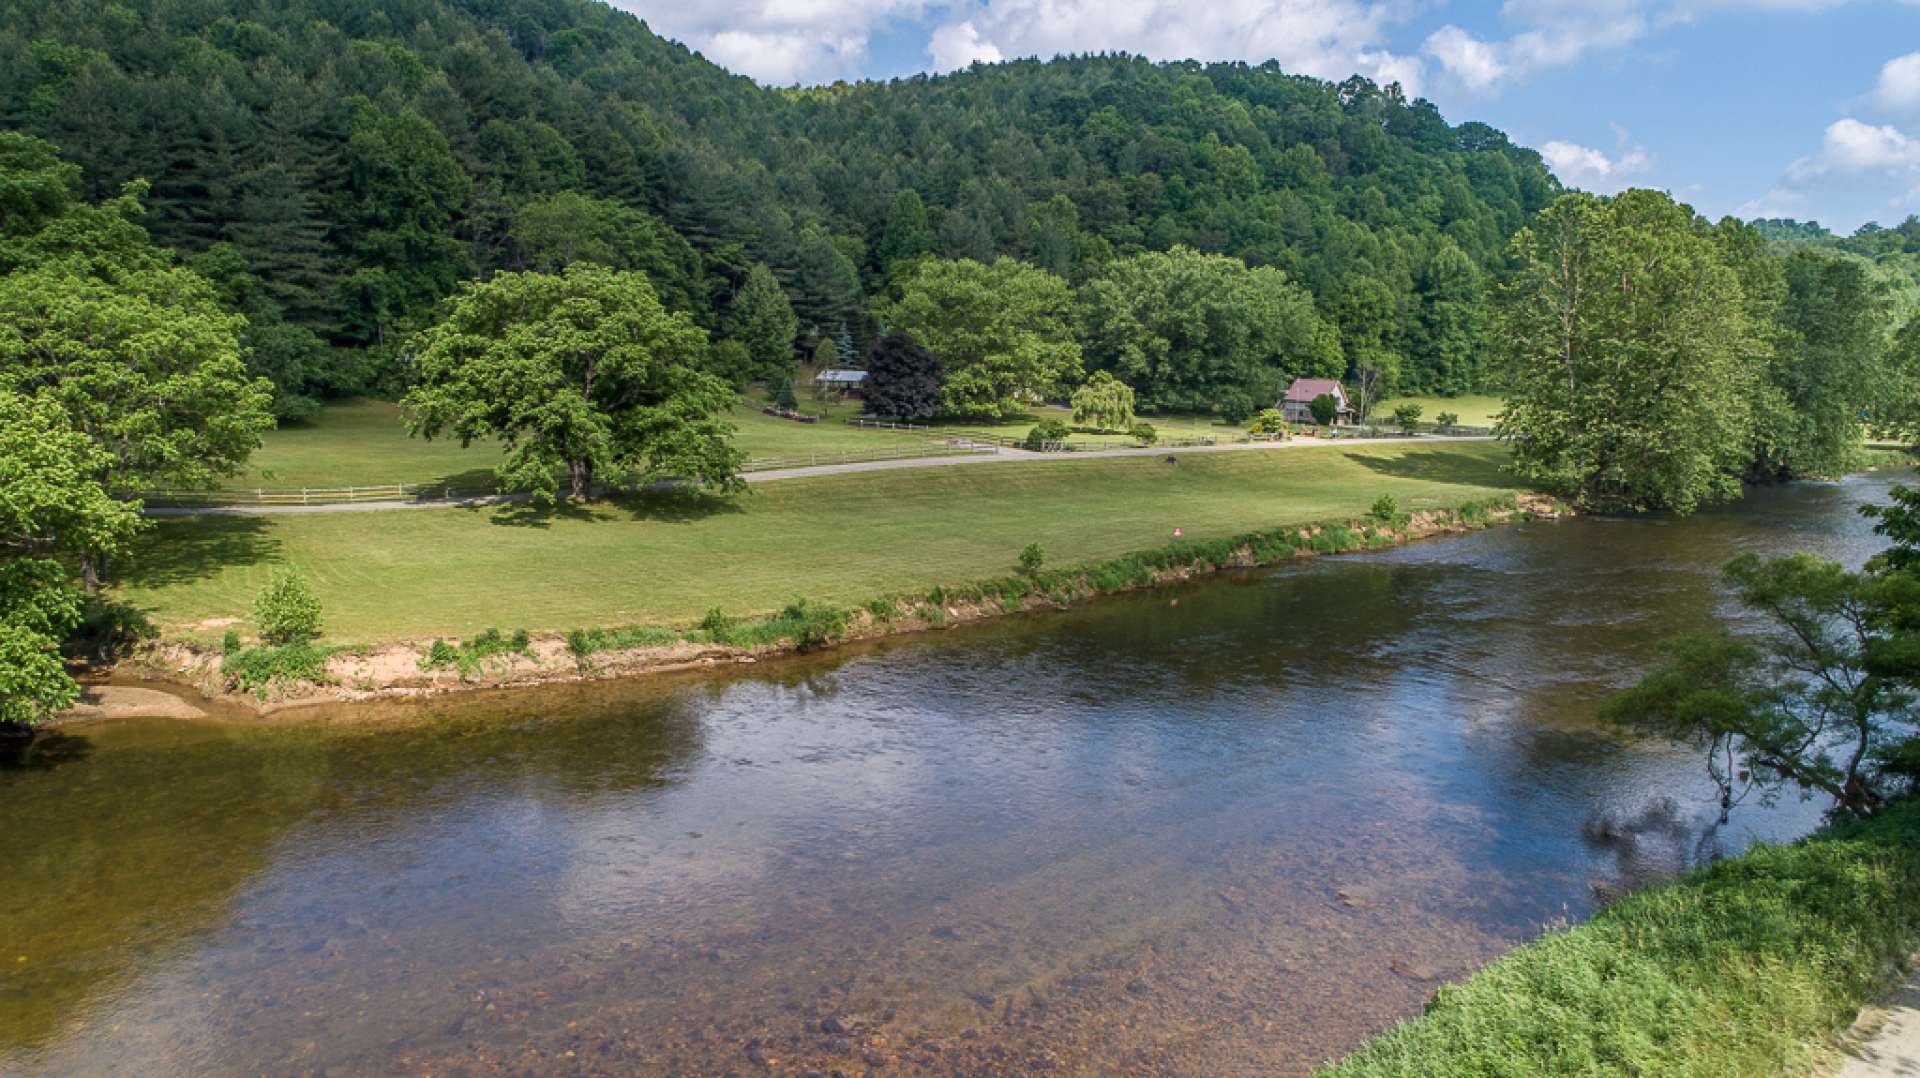 Grab the fishing poles, tubes, canoes and kayaks for a fun filled day on the river. Again lots of level area with easy access to the river for an afternoon picnic or outdoor games.